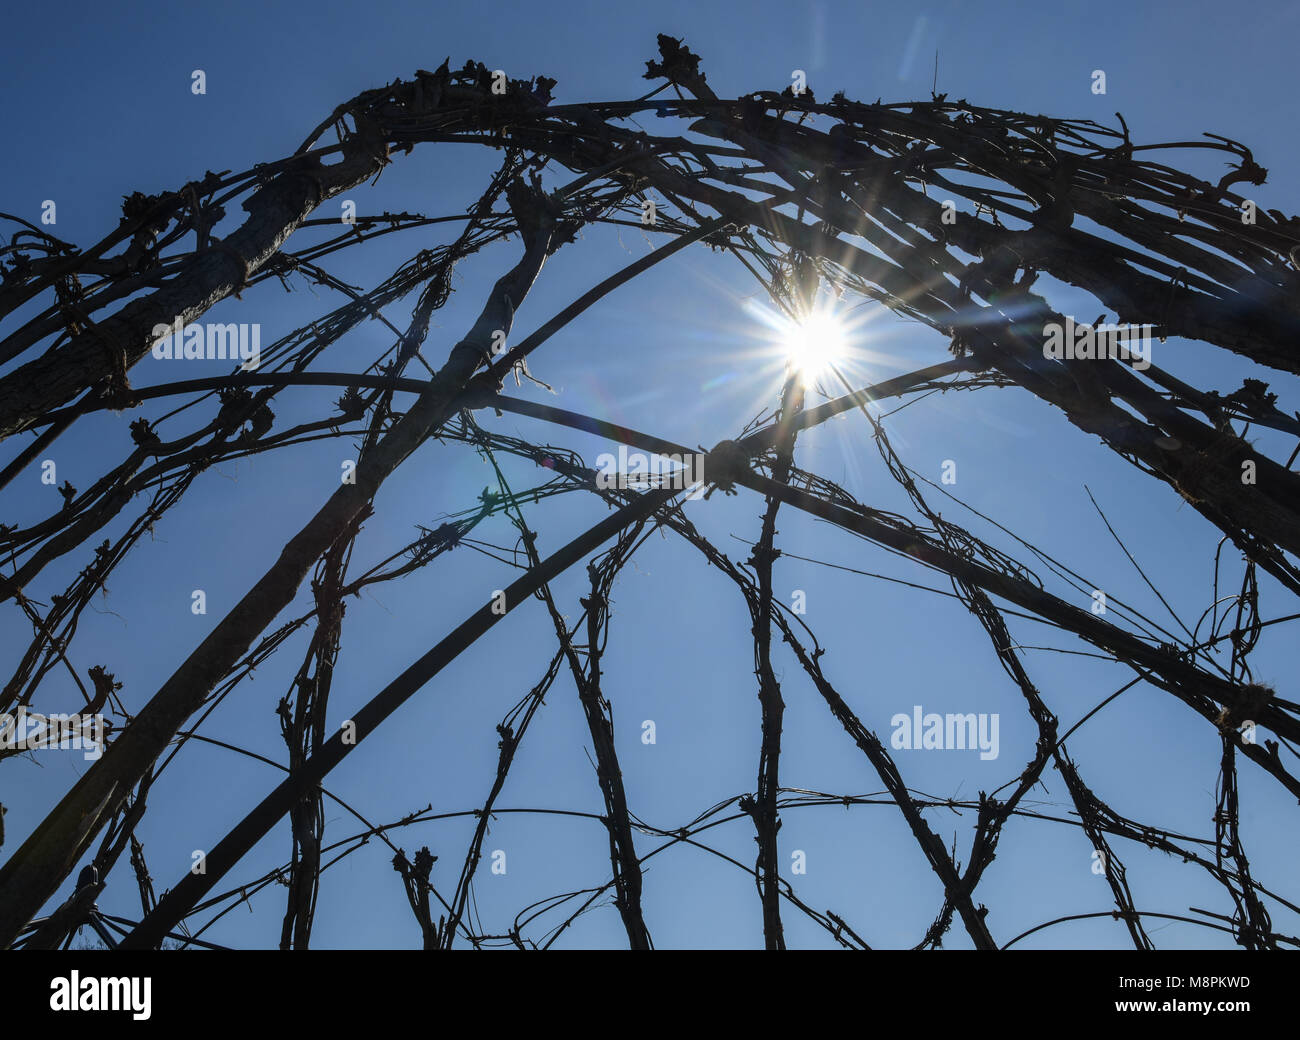 19 March 2018, Germany, Schlepzig: The 'Weidendom', designed by Swiss architect M. Kalberer in 2004, is 11m tall and 22m wide and made of willow shoots that were formed into the shape of a dome. Photo: Patrick Pleul/dpa-Zentralbild/ZB Stock Photo